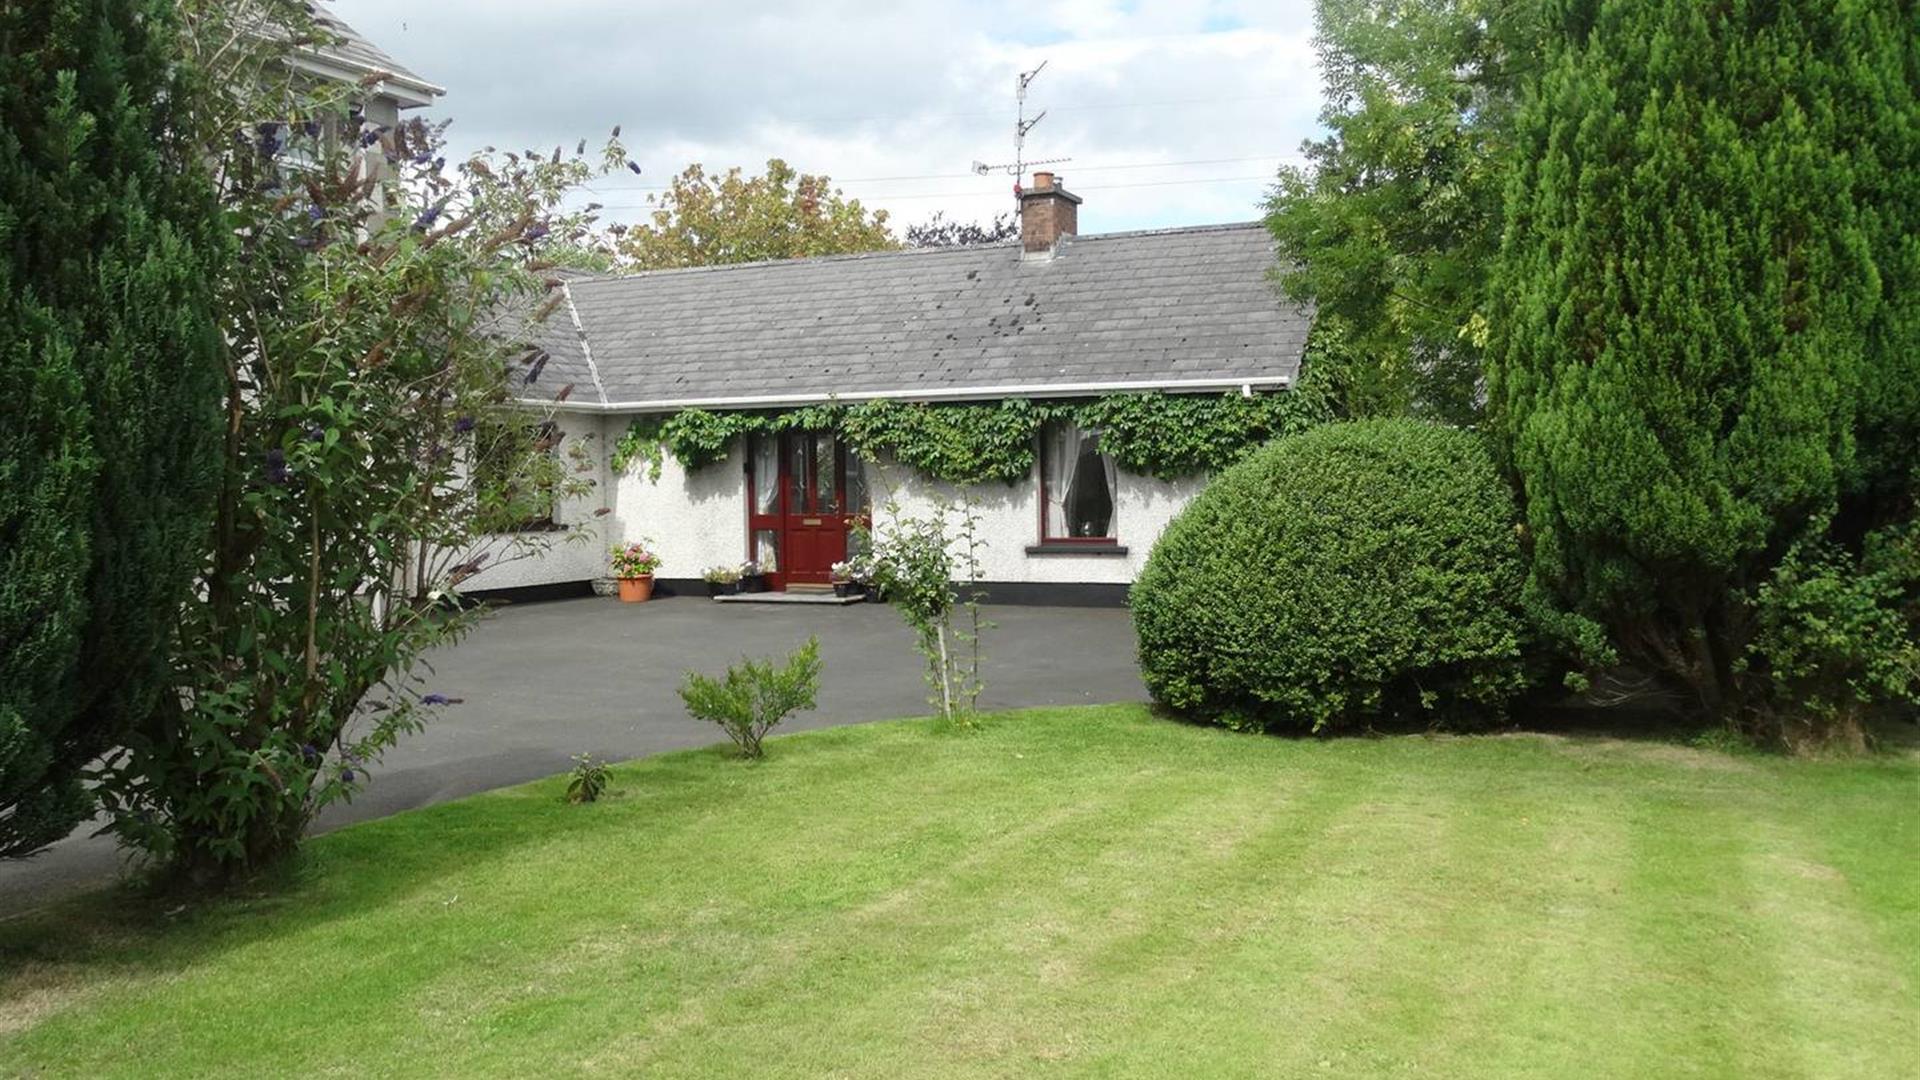 Outside of cottage, garden and trees in image